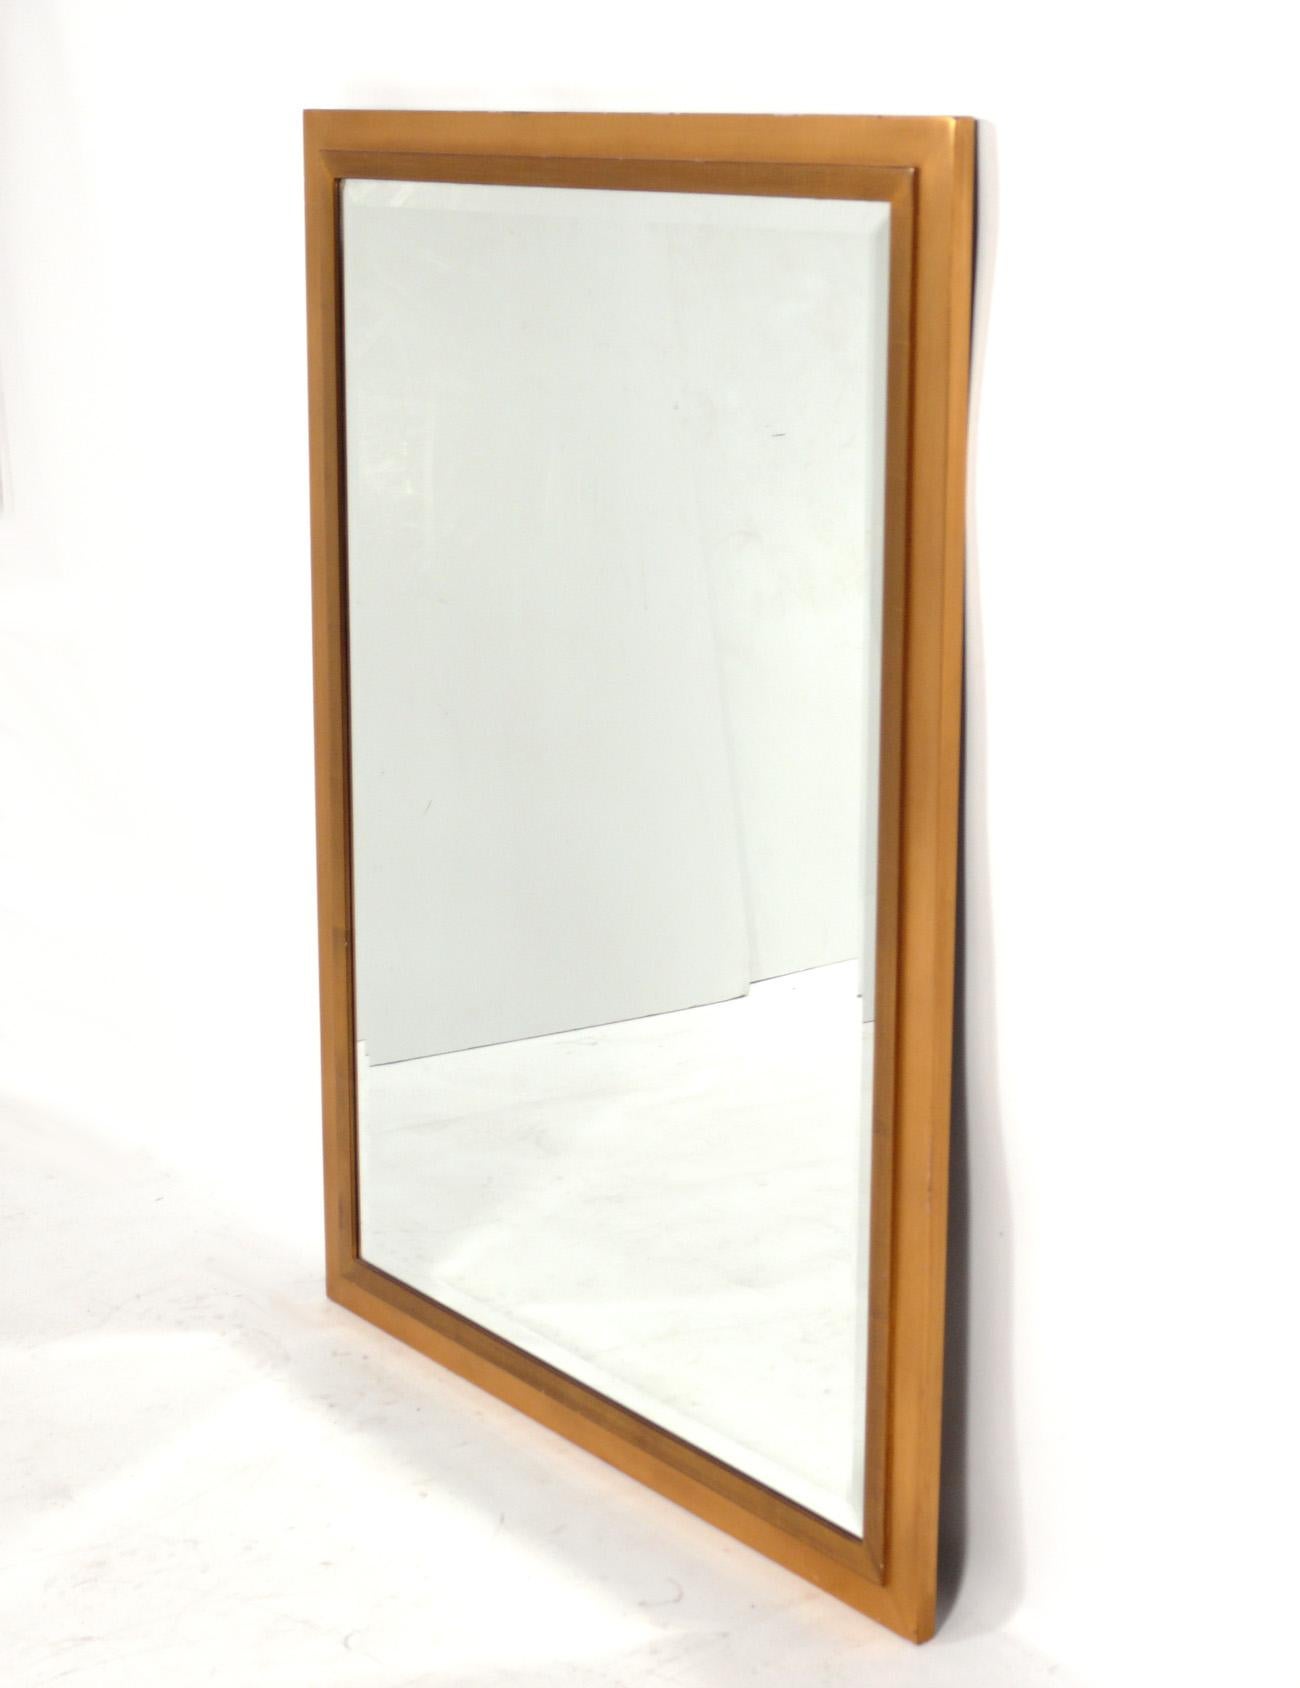 Clean lined gilt wood mirror, American, circa 2000s. This mirror was recently removed from the storied Carlyle Hotel in NYC. It measures an impressive 48